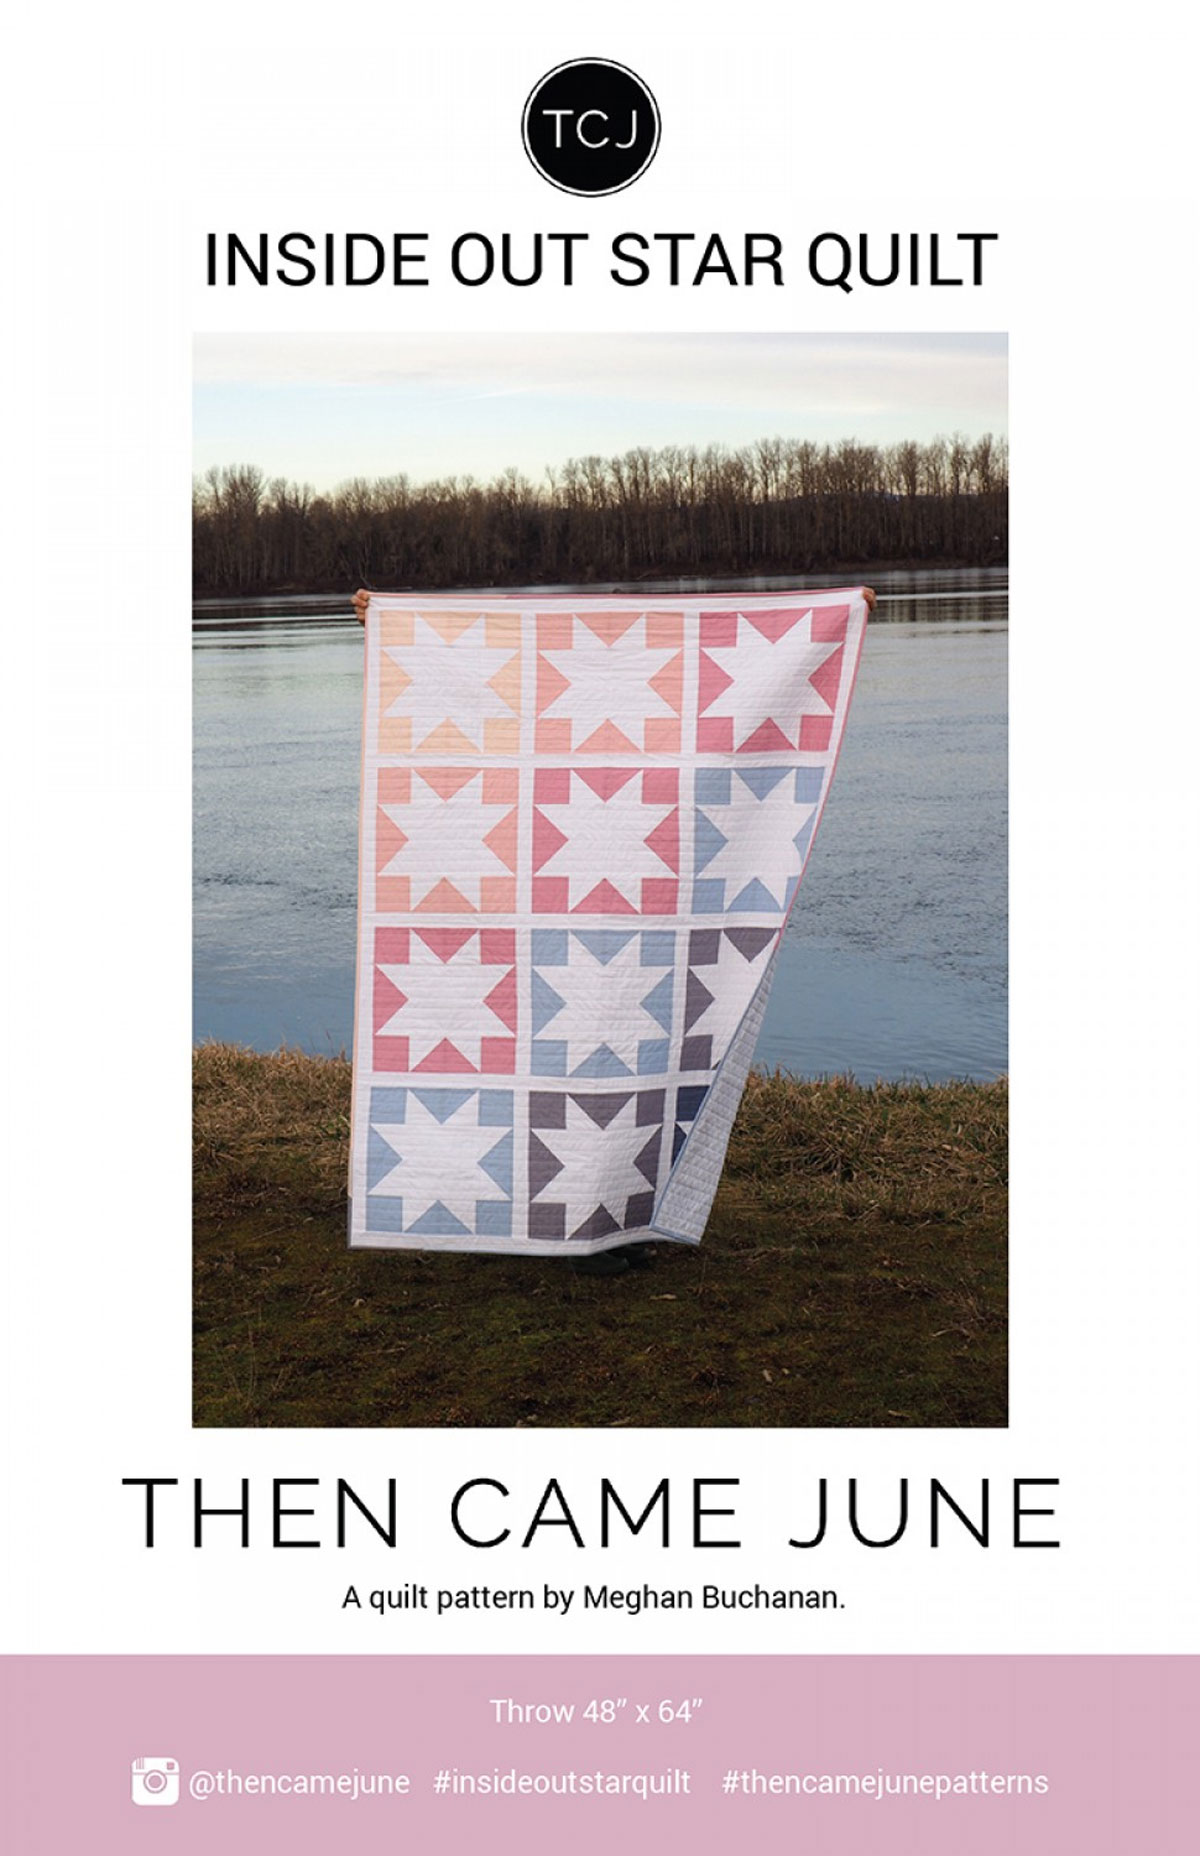 Inside-Out-Star-quilt-sewing-pattern-Then-Came-June-Meghan-Buchanan-front